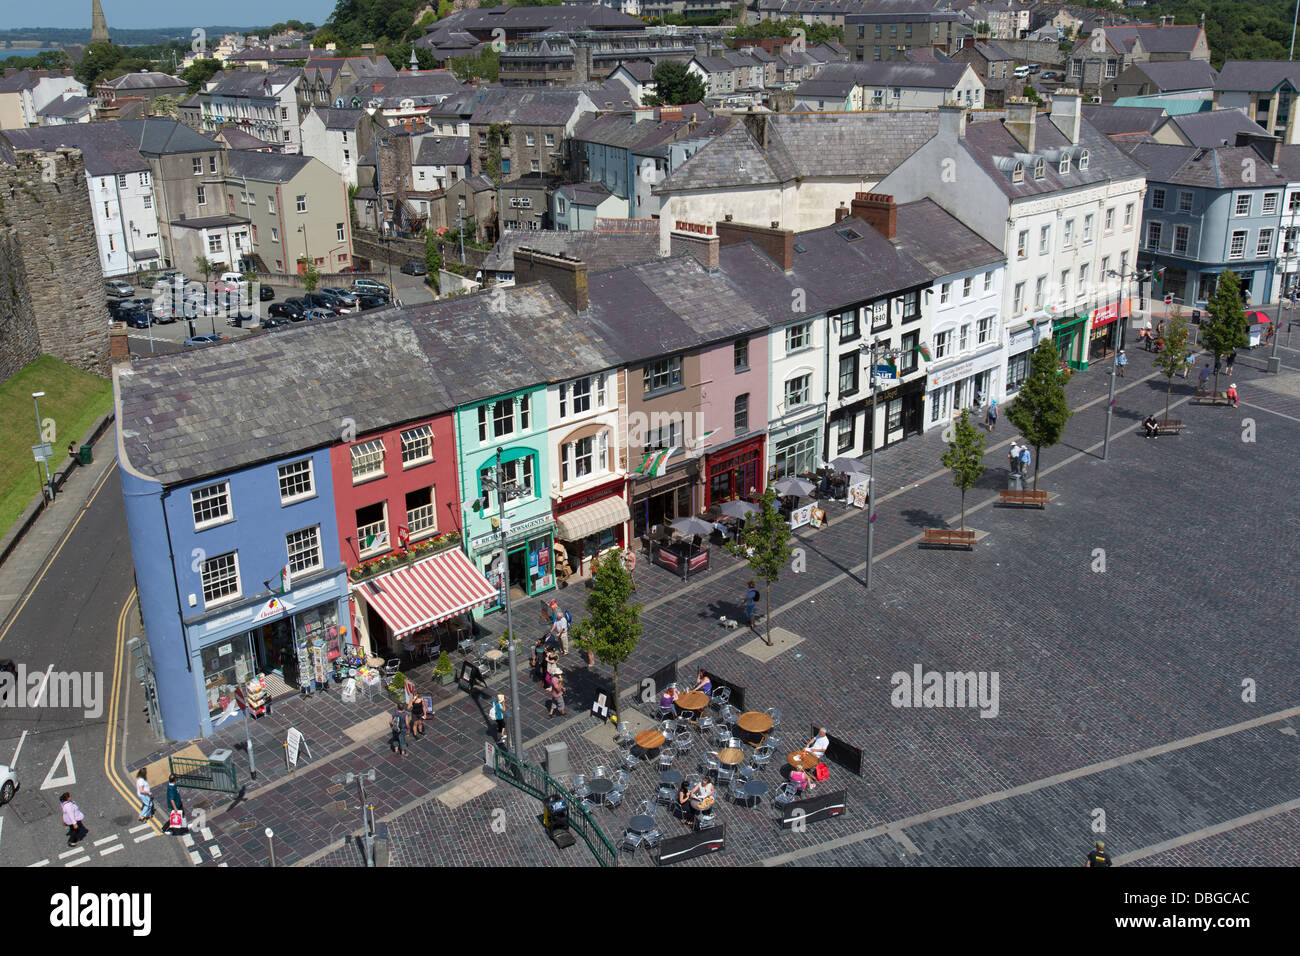 Town of Caernarfon, Wales. Picturesque colourful view of shops and cafes in Caernarfon’s Castle Square. Stock Photo